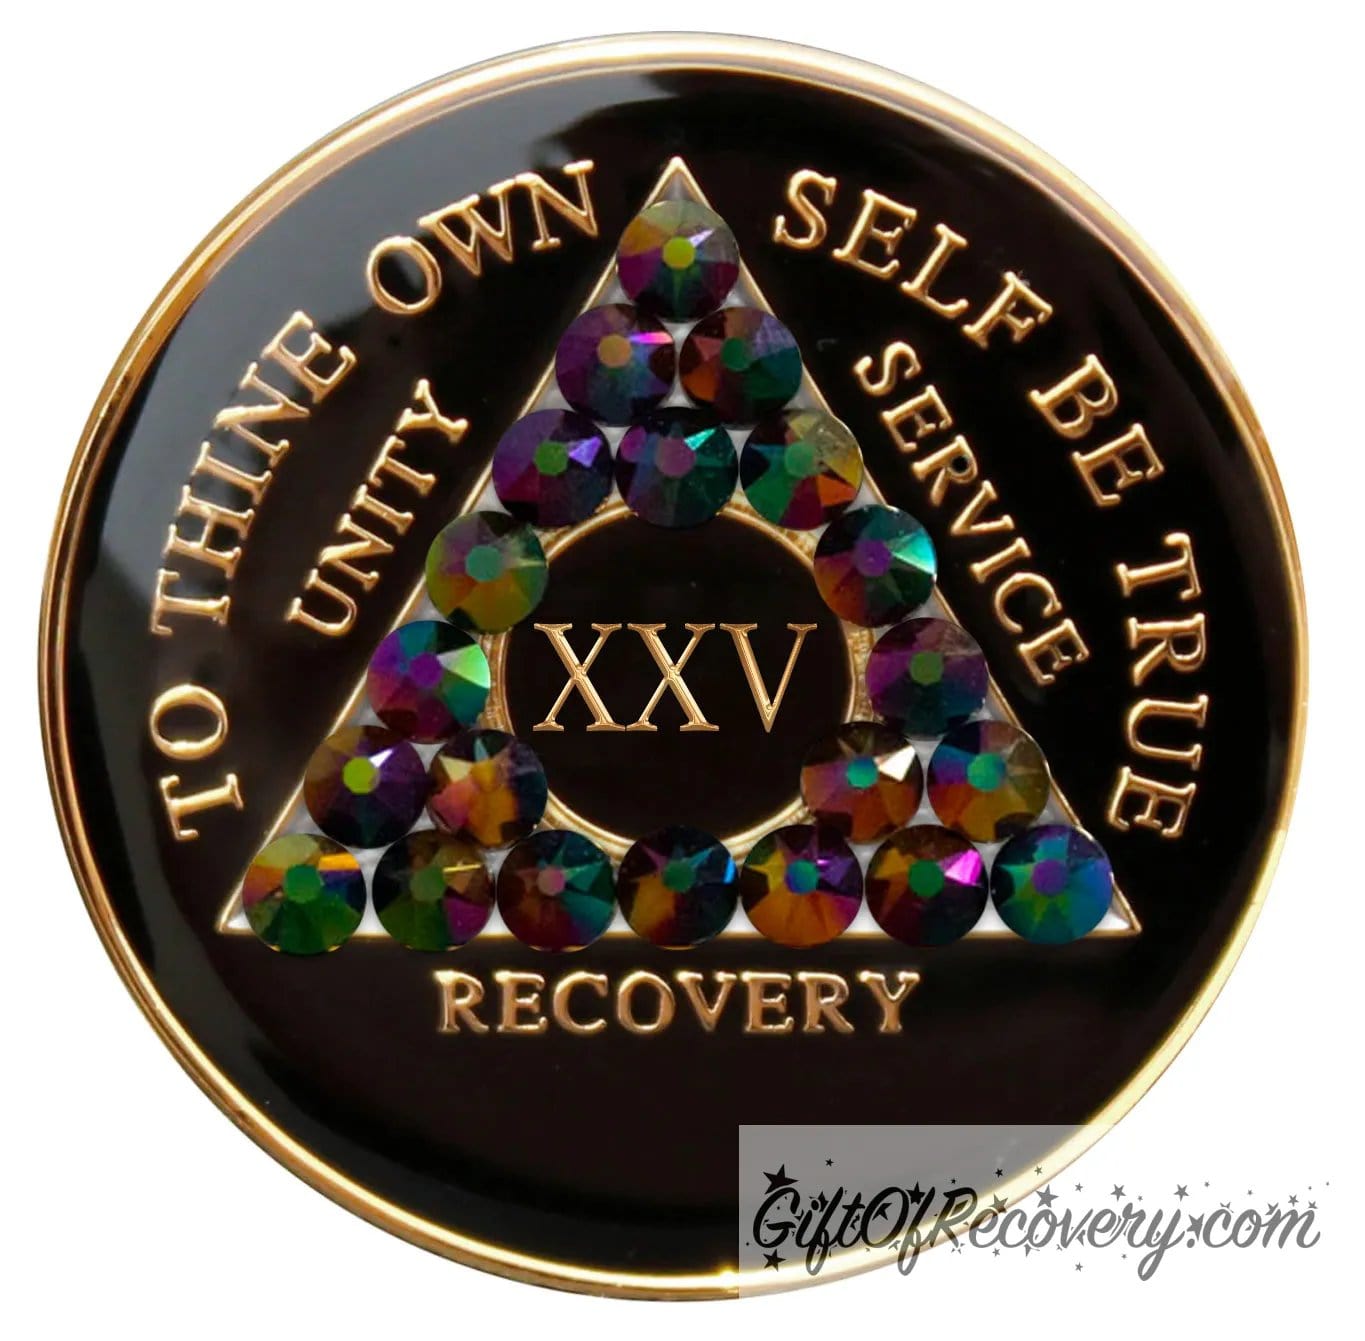 25 year black onyx AA recovery medallion, with 21 genuine peacock crystals, symbolizing the beauty and diversity of recovery journeys, the AA medallion has; to thine own self be true, unity, service, recovery, roman numeral, and the rim, embossed with 14k gold and sealed with resin for a glossy finish.